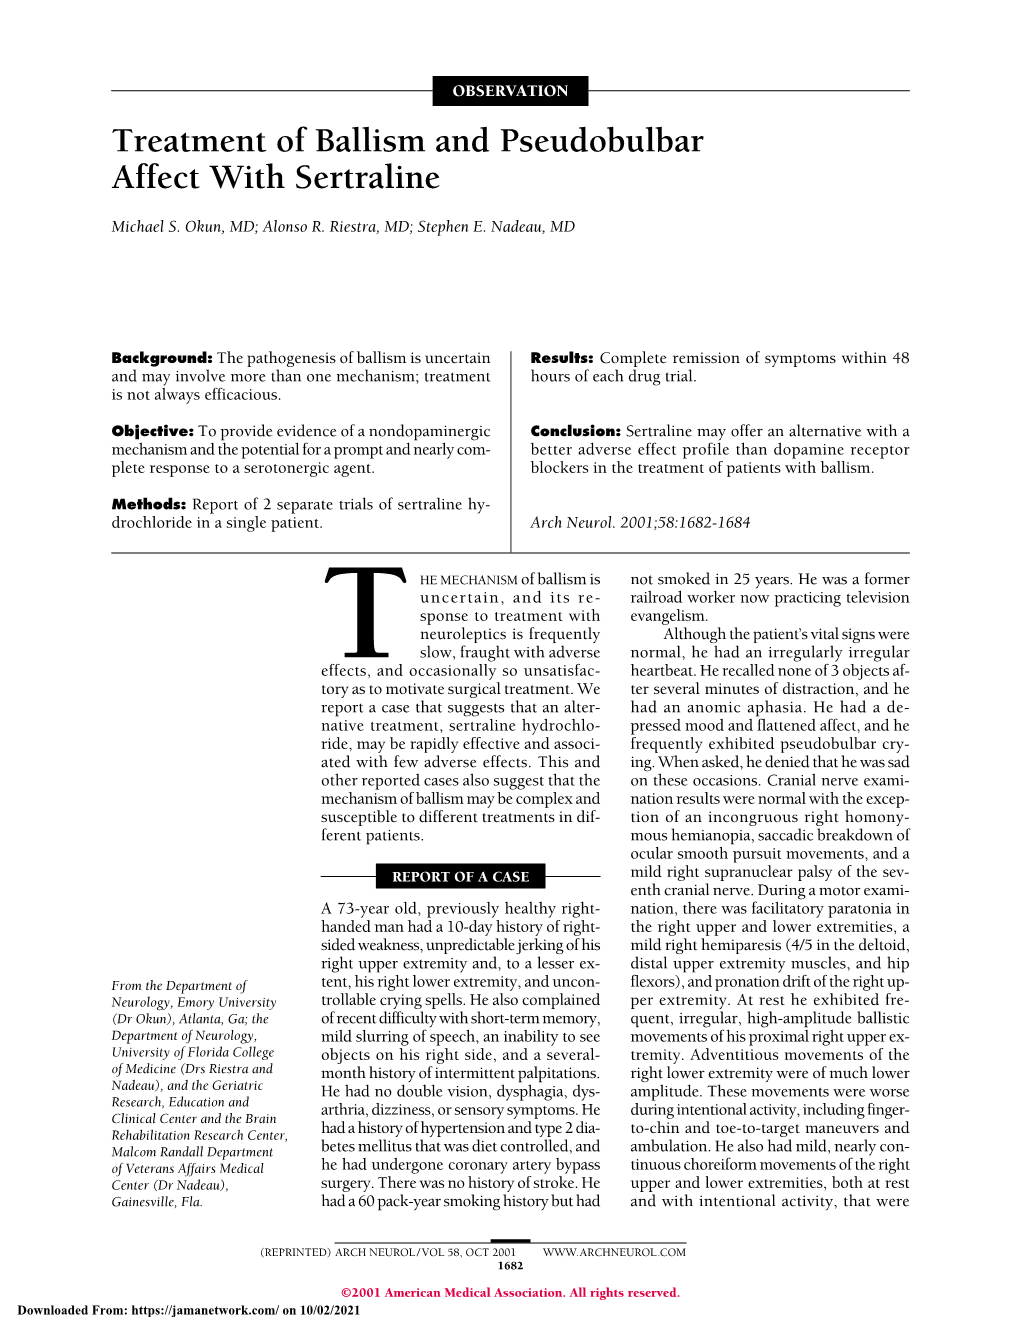 Treatment of Ballism and Pseudobulbar Affect with Sertraline